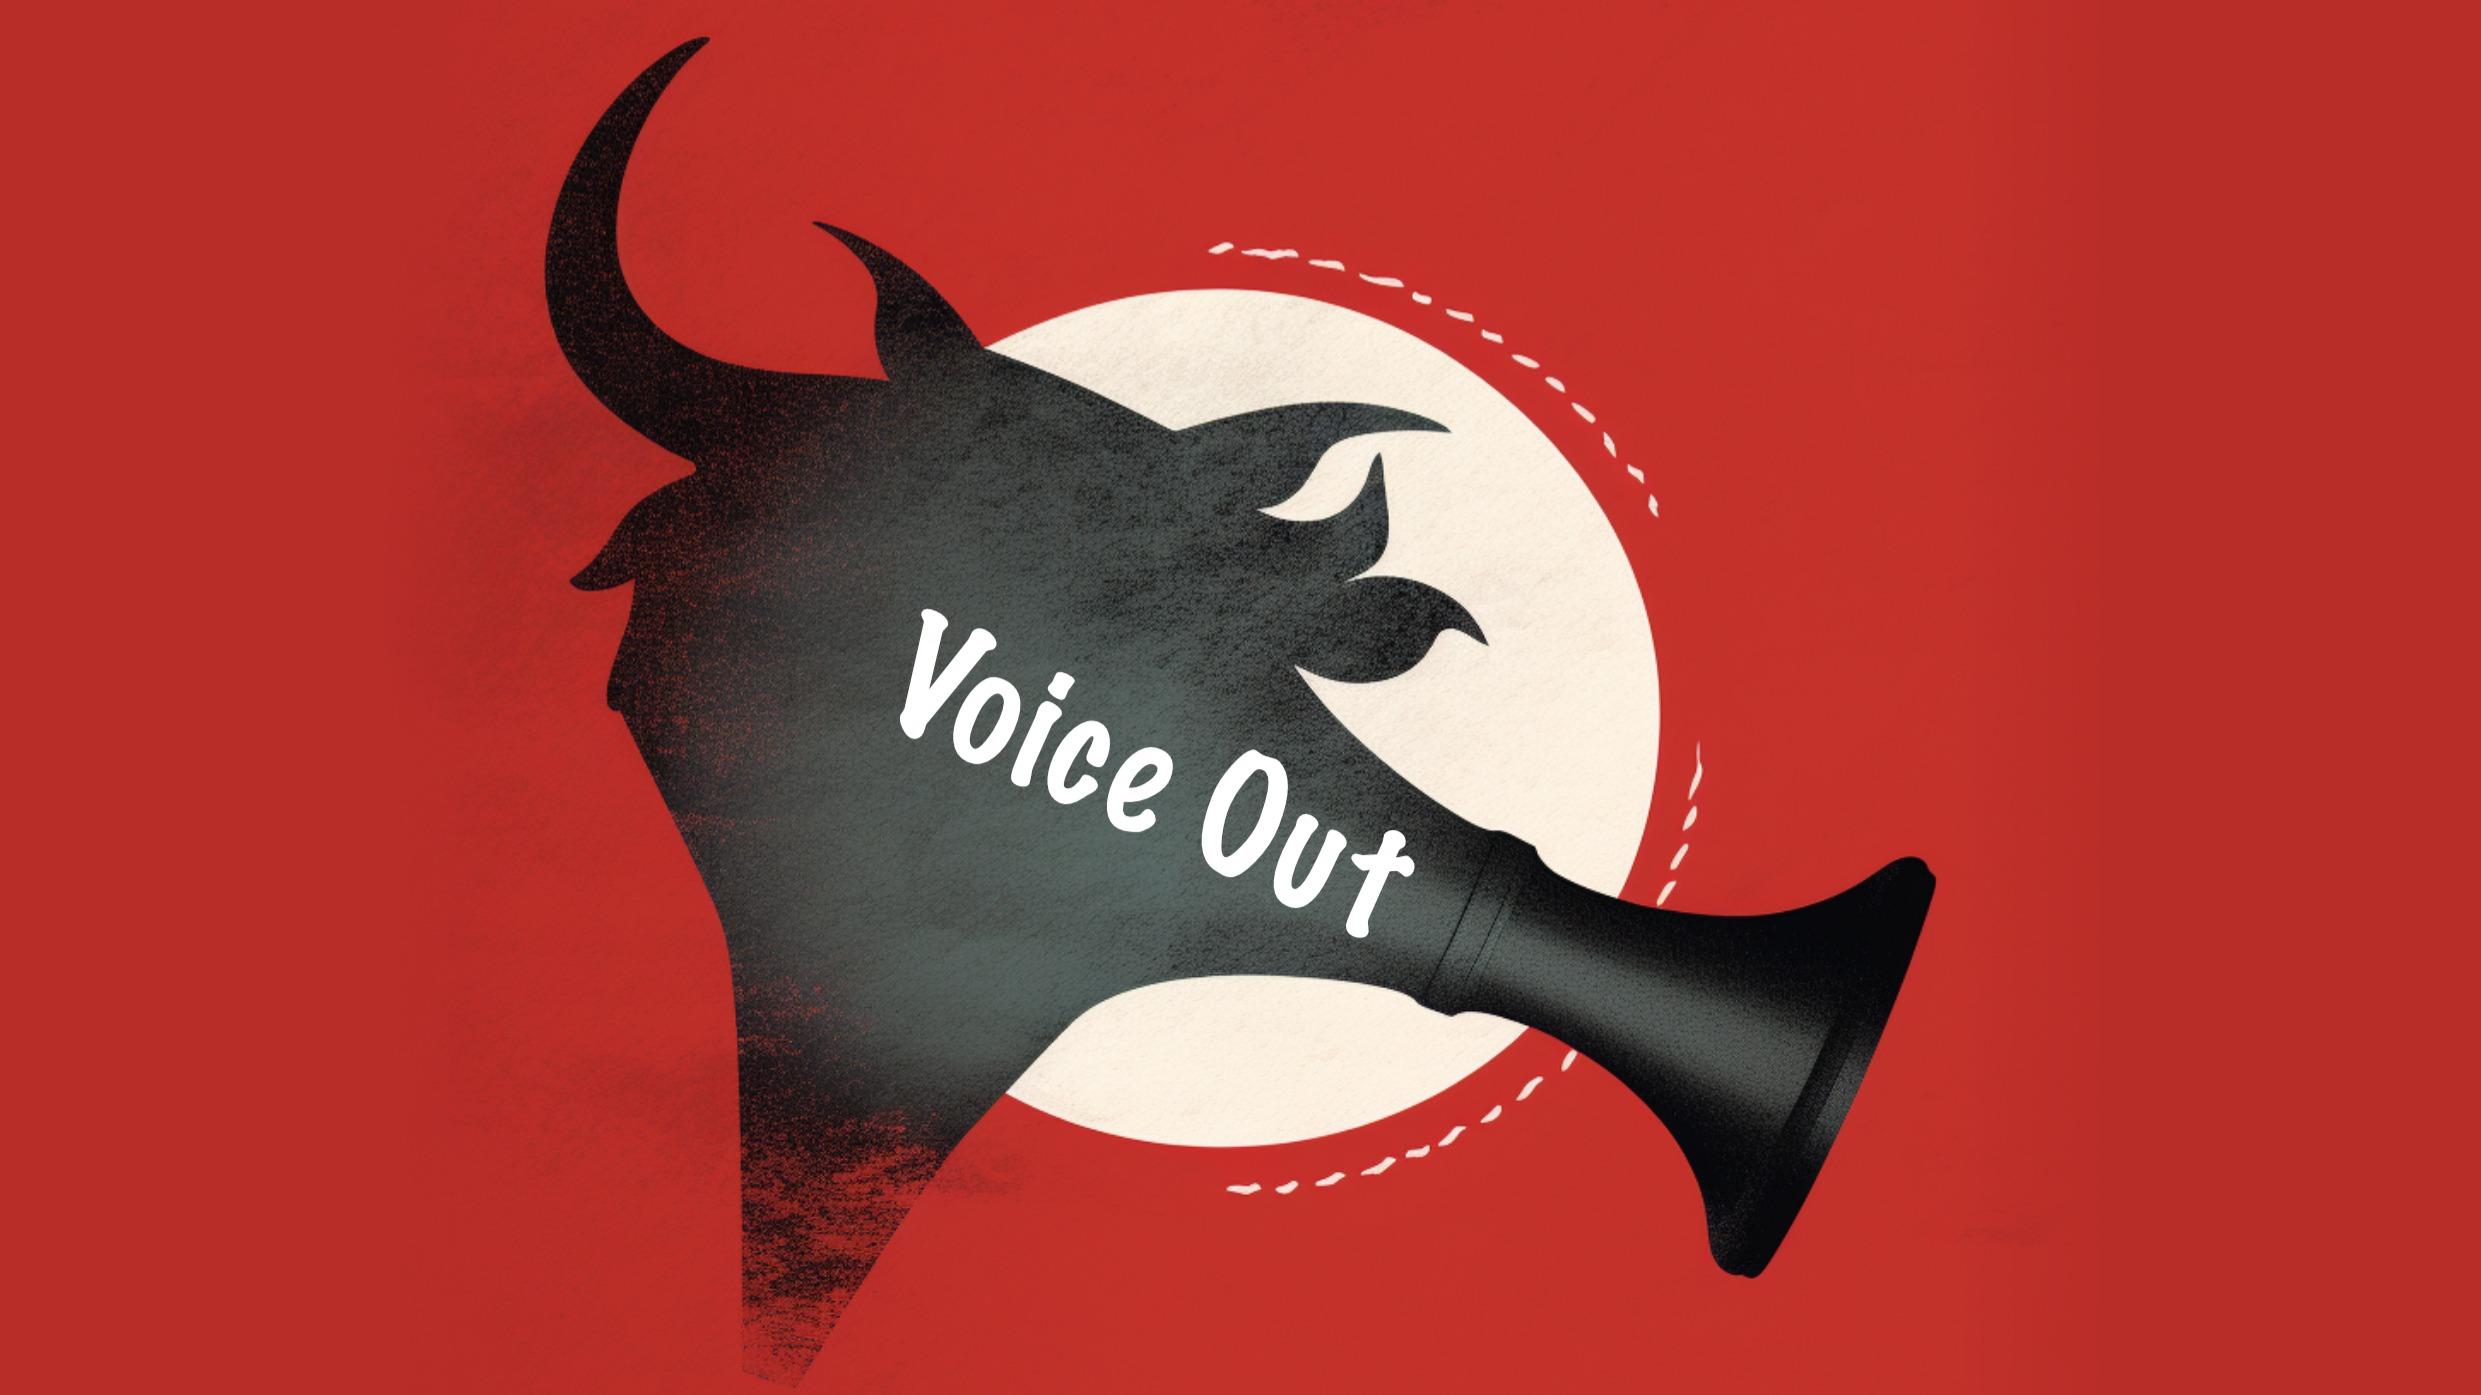 Voice Out